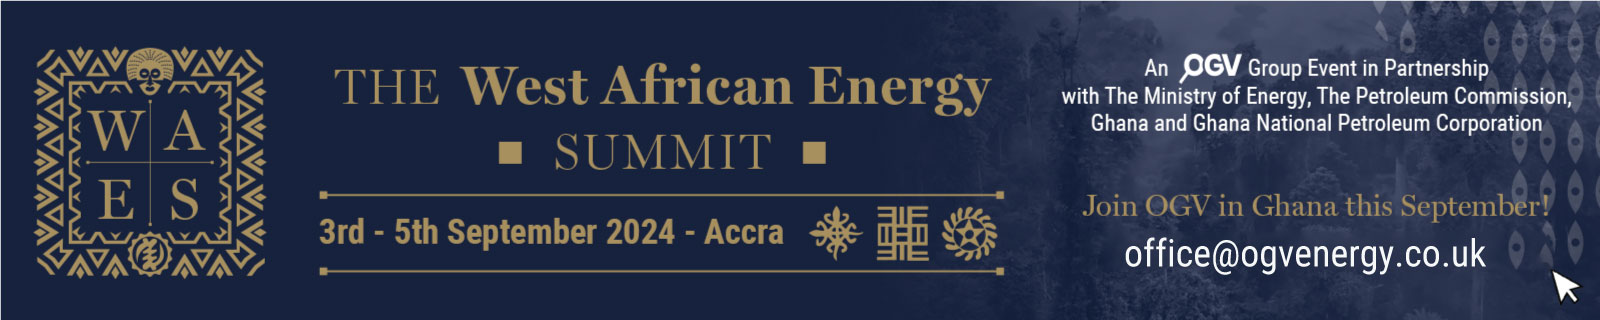 Contact Us The West African Energy Summit 2024